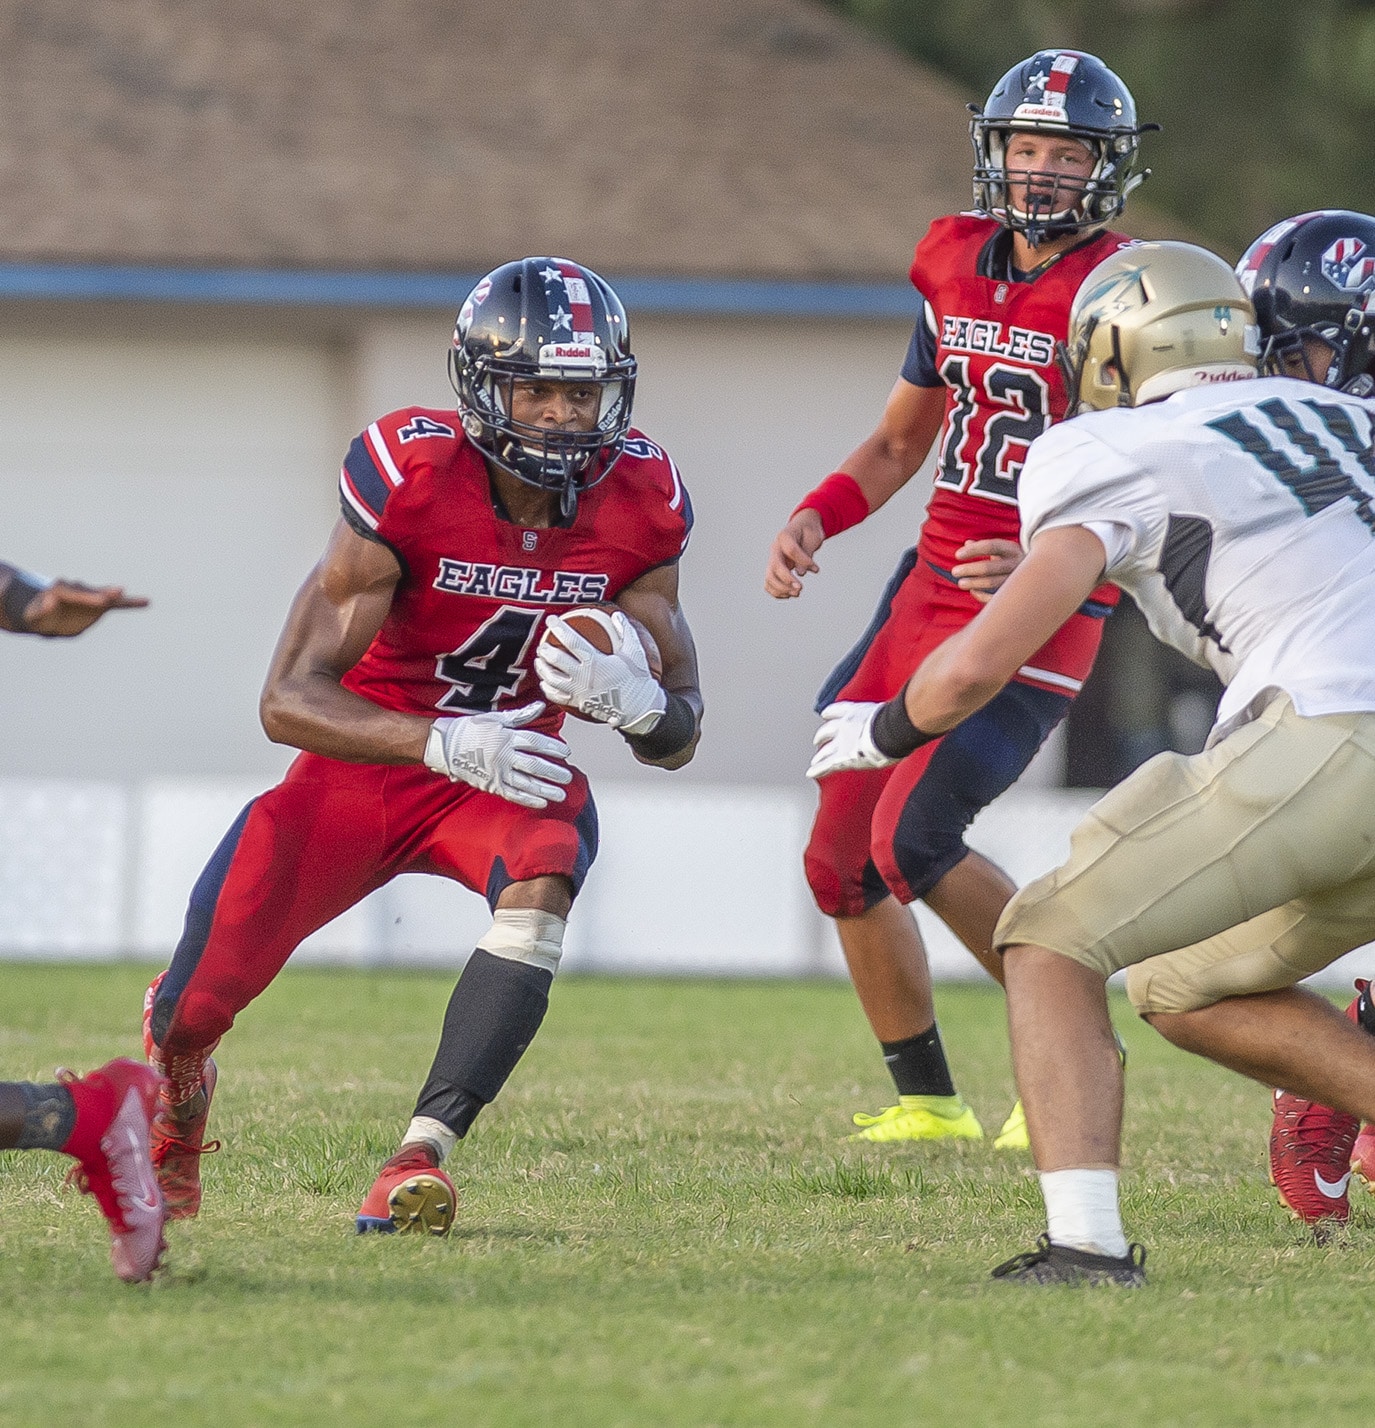 Springstead High’s ,4, Anthony Alexis exploits a hole in the Sunlake defense Friday at Booster Stadium. Photo by JOE DiCRISTOFALO